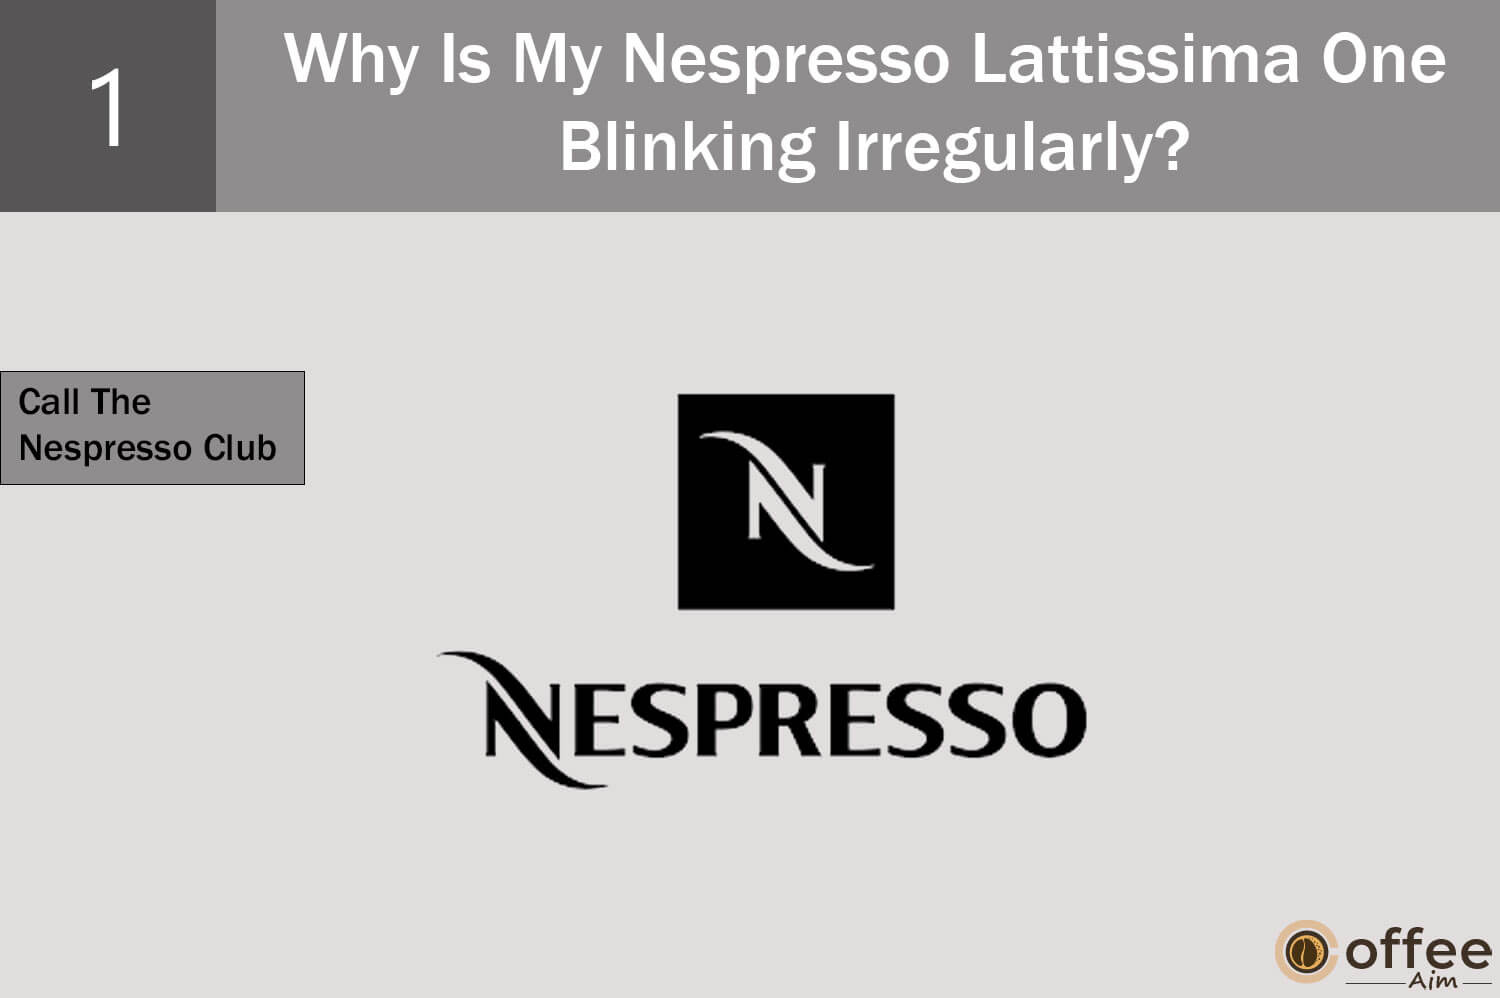 Resolve blinking lights by contacting Nespresso Club for technical faults. They provide 24/7 assistance, including repair or exchange of machine parts. Find contact details in the provided section.